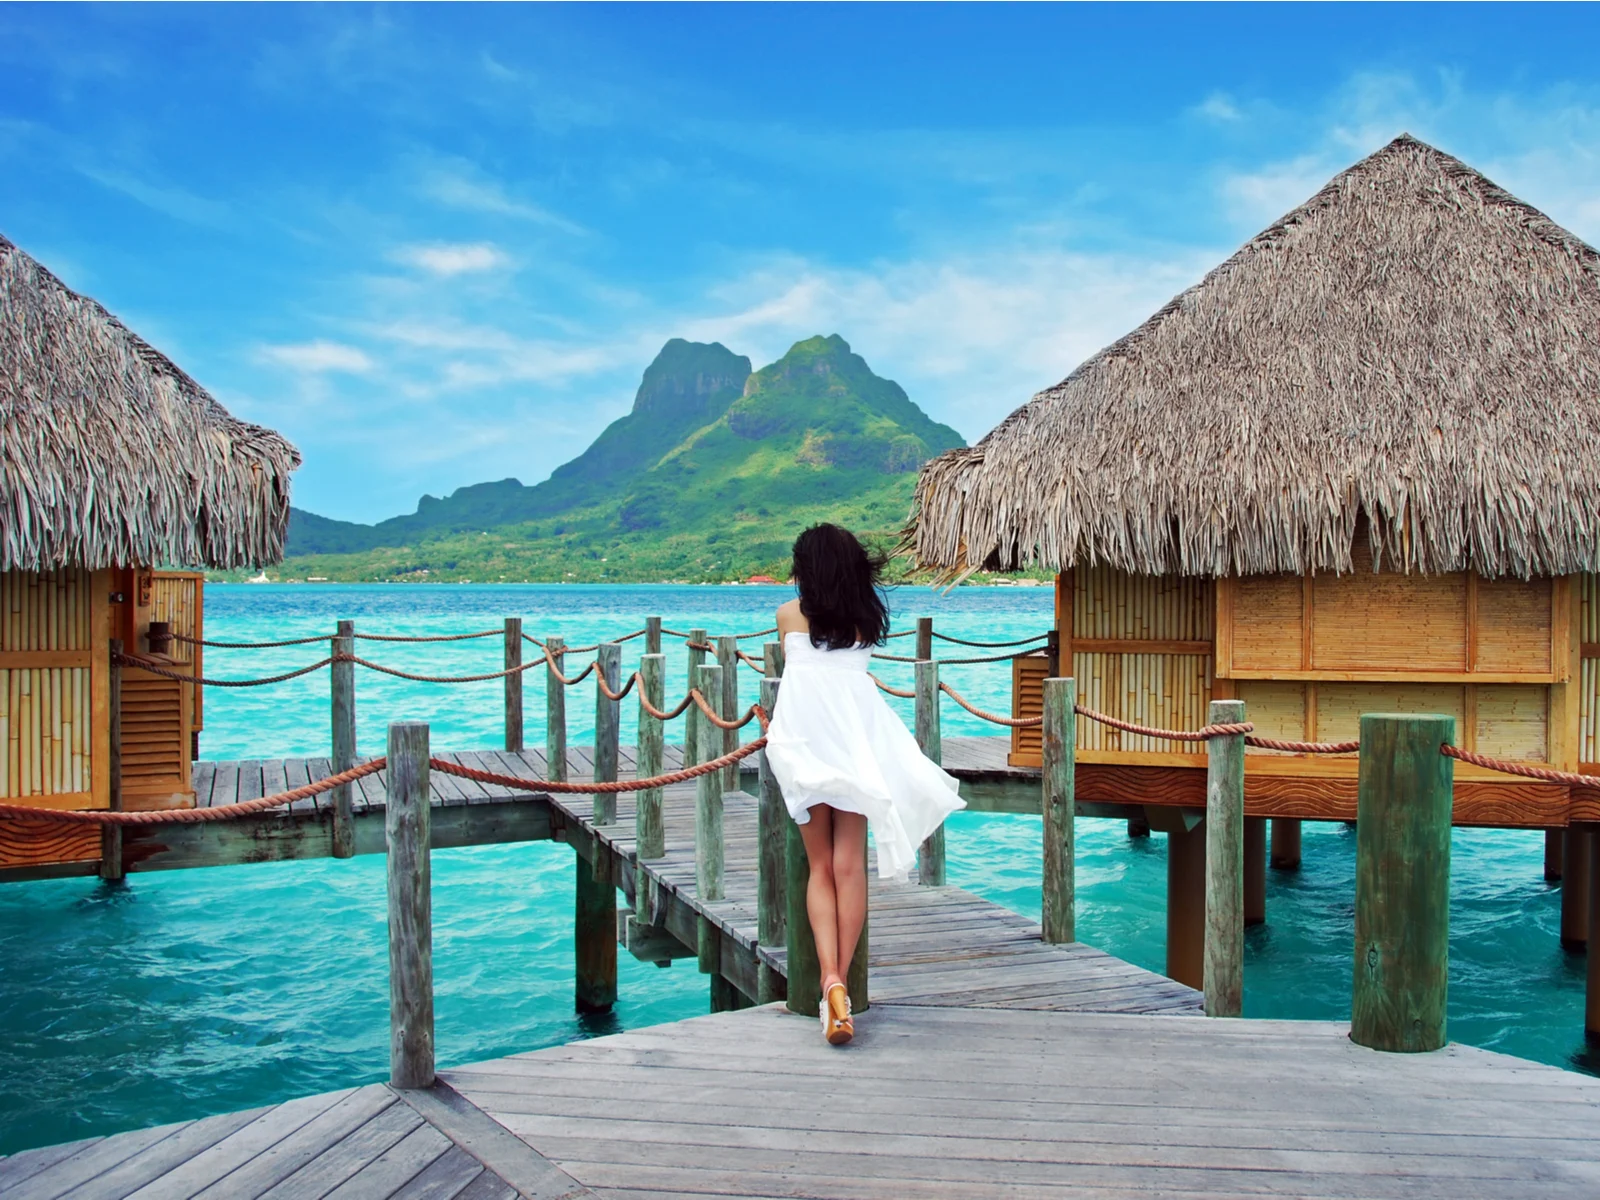 Woman standing on a walkway between huts in one of the best places for an island vacation, Bora Bora